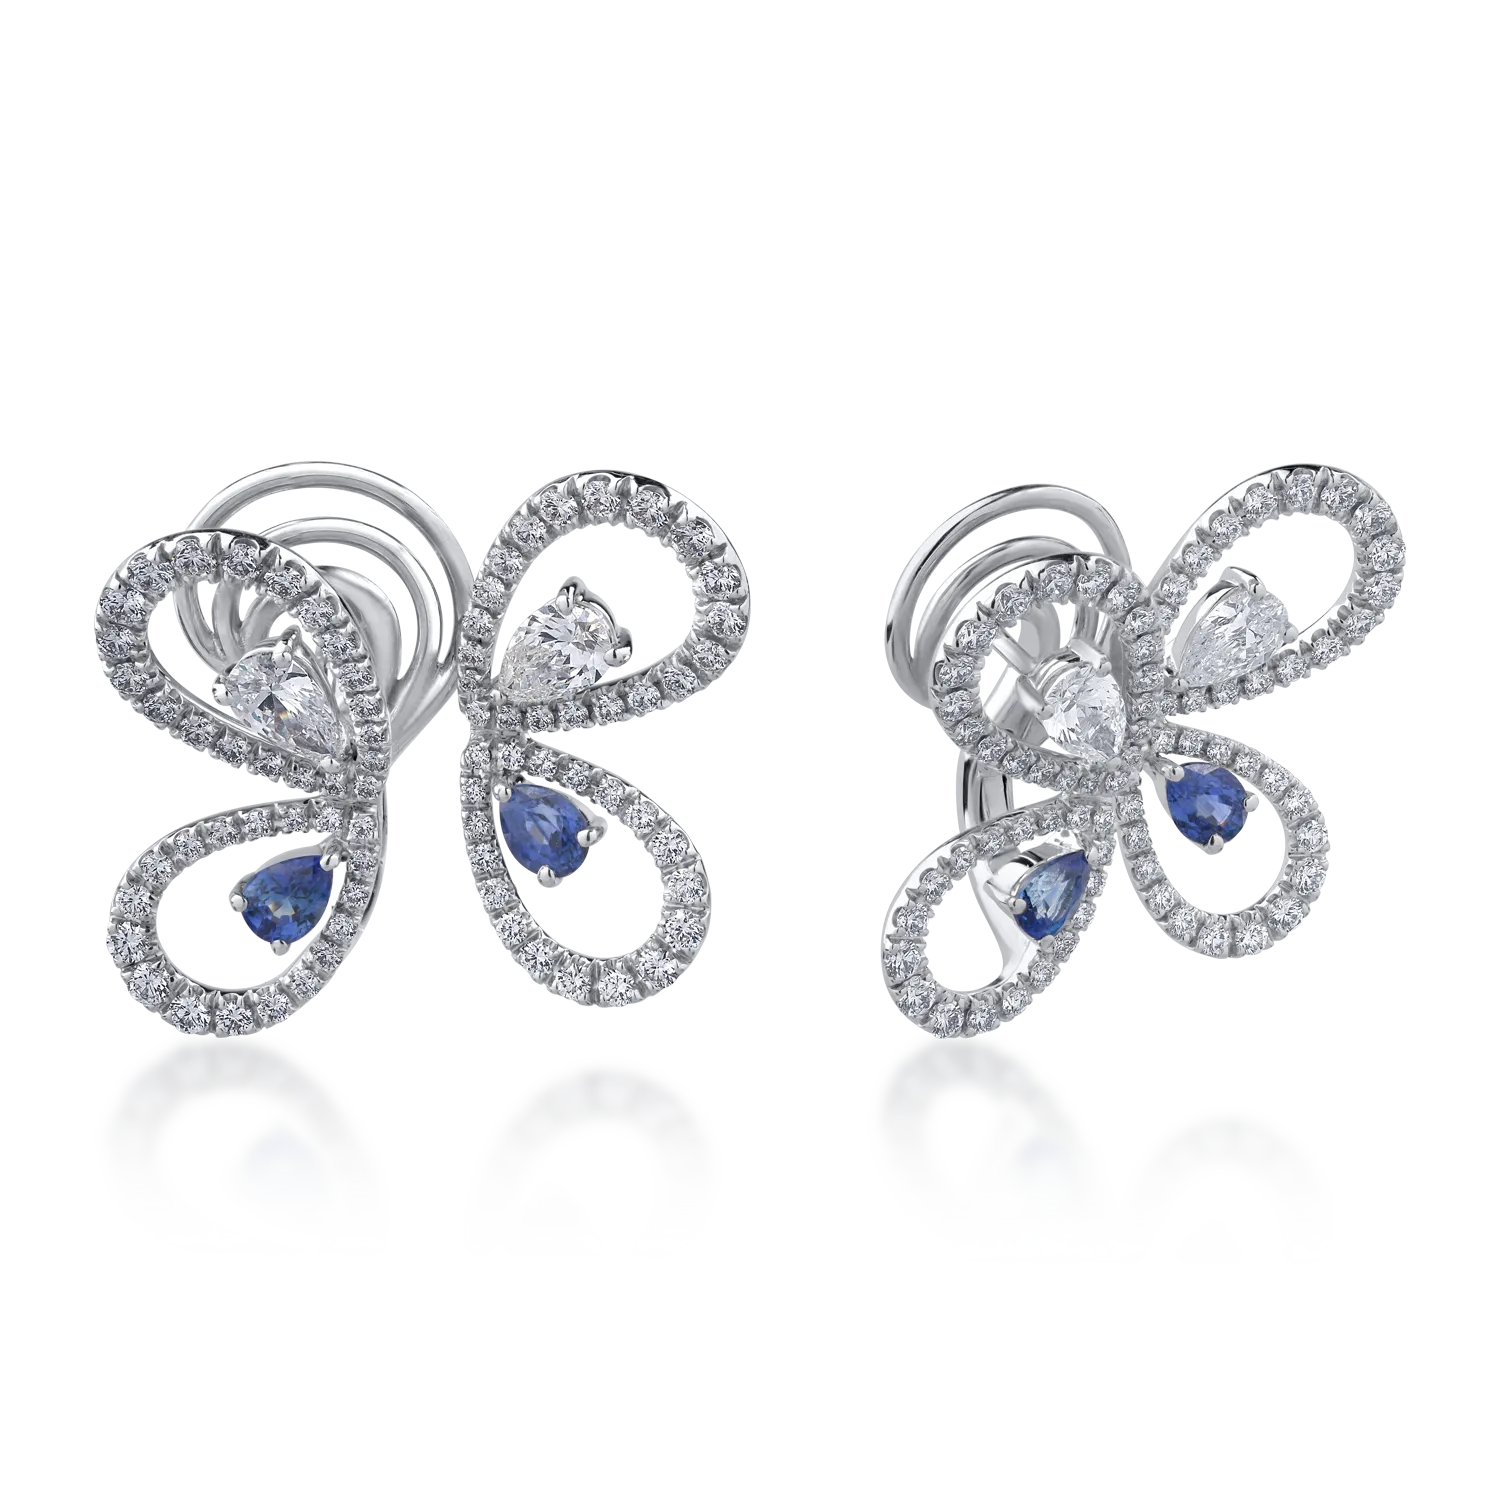 18K white gold earrings with 2.83ct diamonds and 1.22ct sapphires